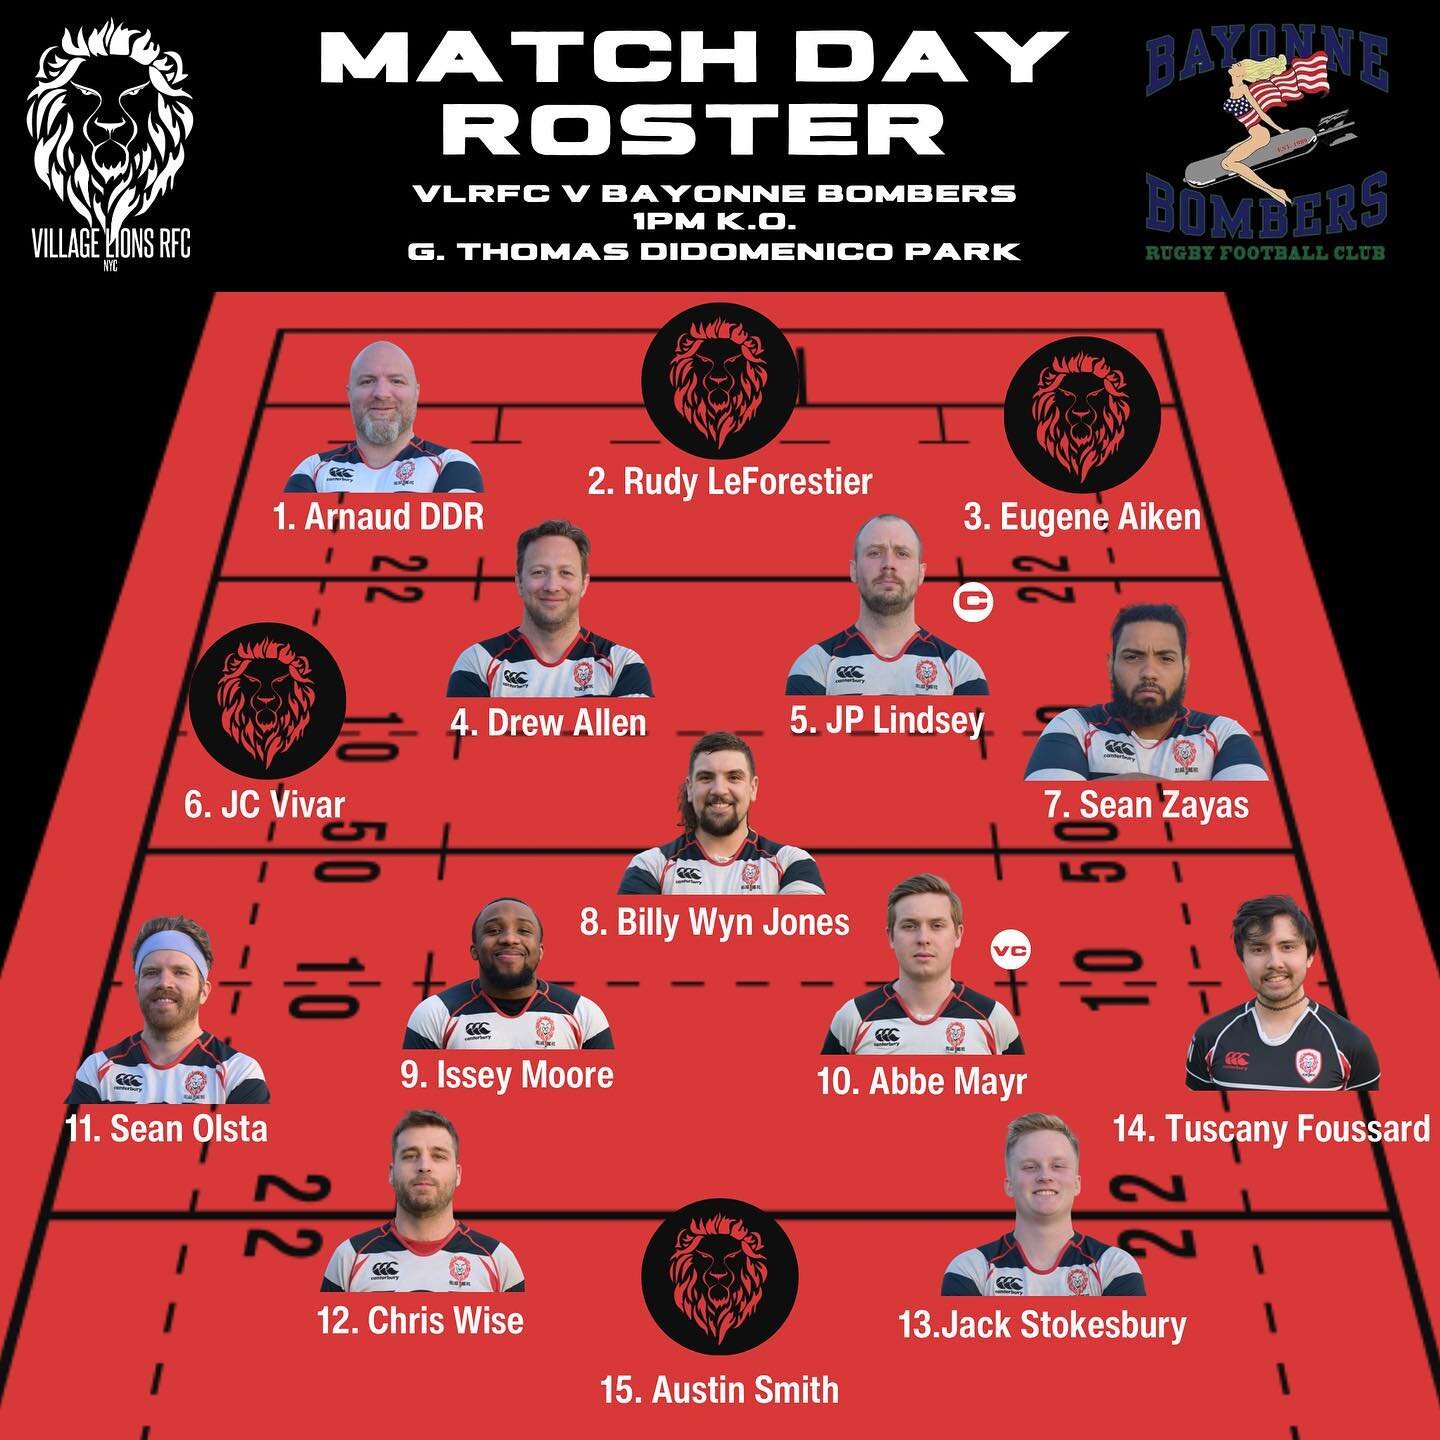 Here are your Lions that are taking on @bombersrugby tomorrow! Founded the same year as us and by friends of Alan Whelan, the Bombers have a storied history as our opponent. Come watch what is sure to be a fantastic game tomorrow!